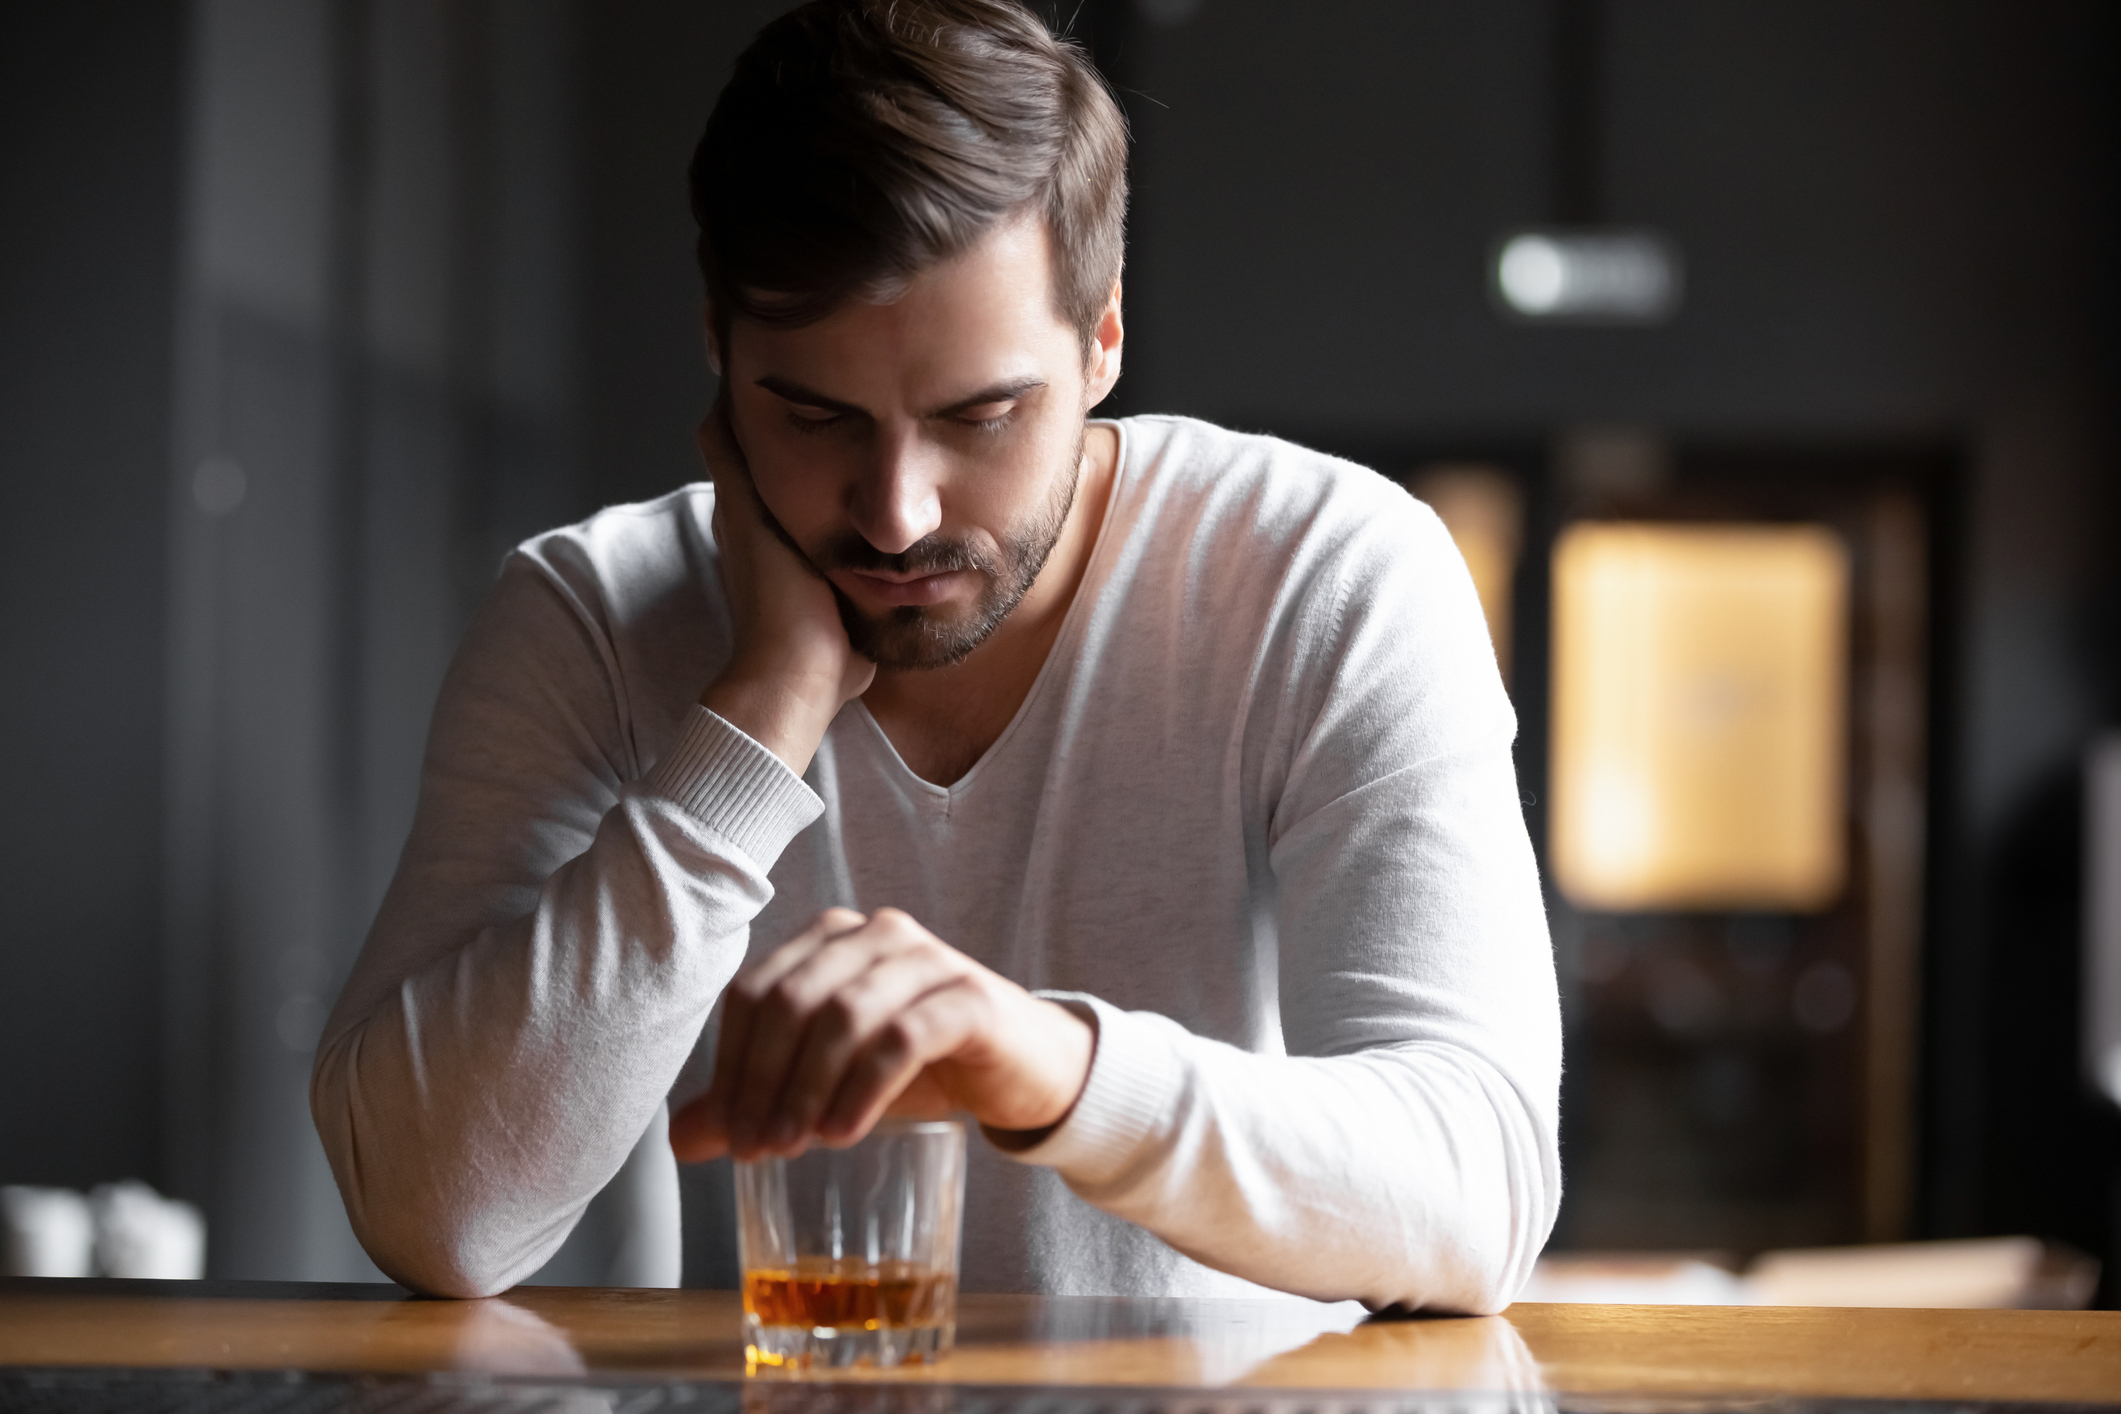 Man sitting at a table with his head resting on his hand, looking at a glass of whiskey